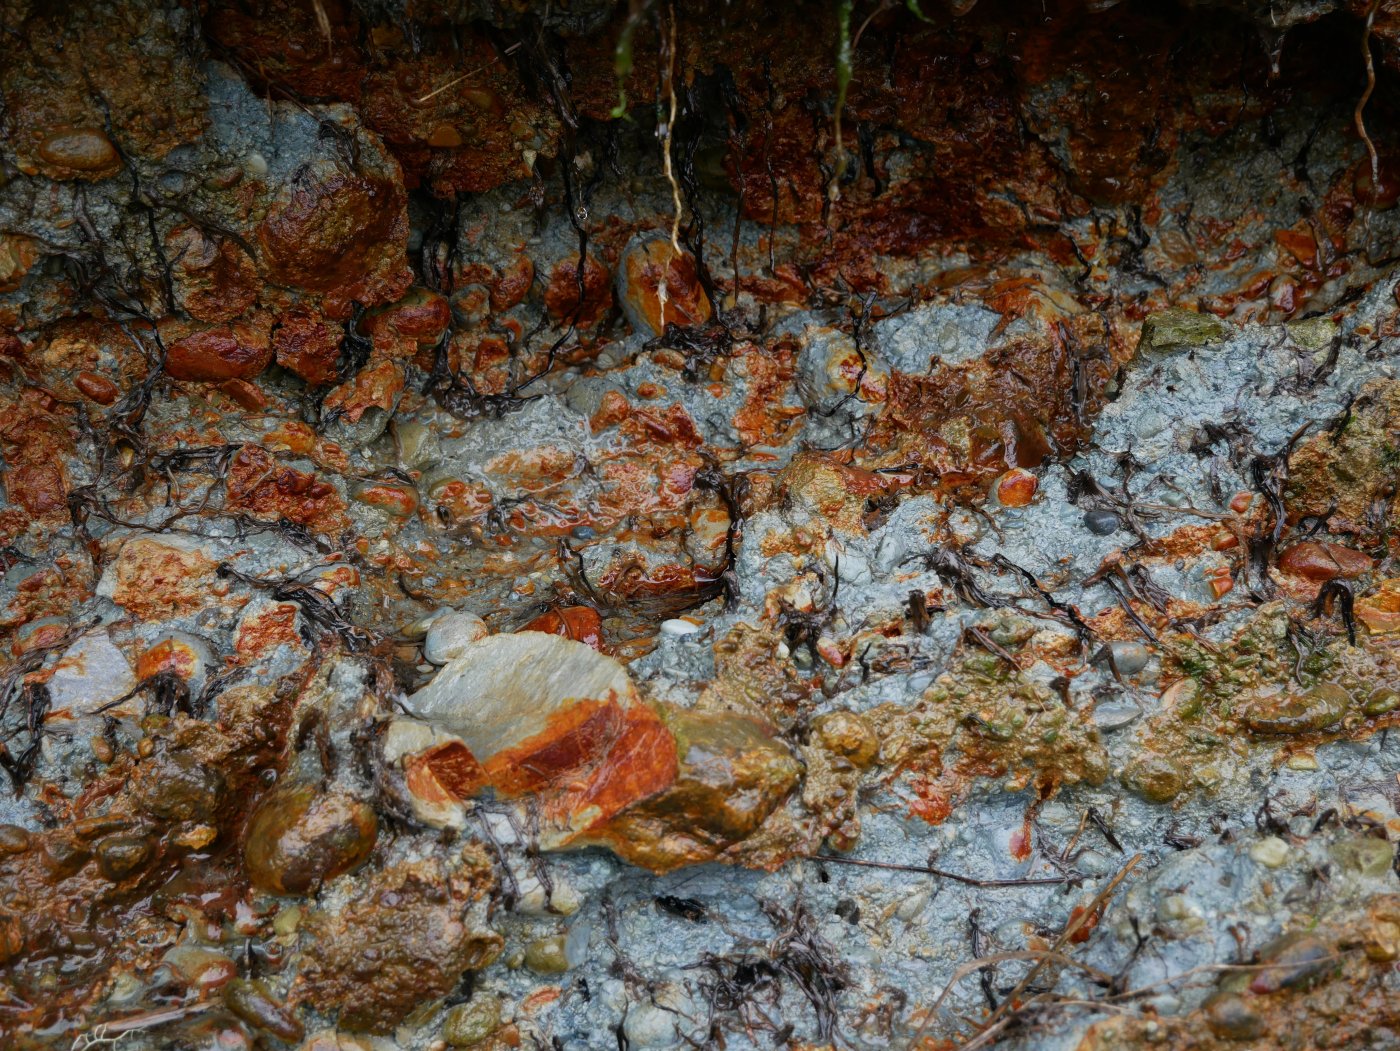 Image of ochre-rich clays on the banks of the Salmon River.